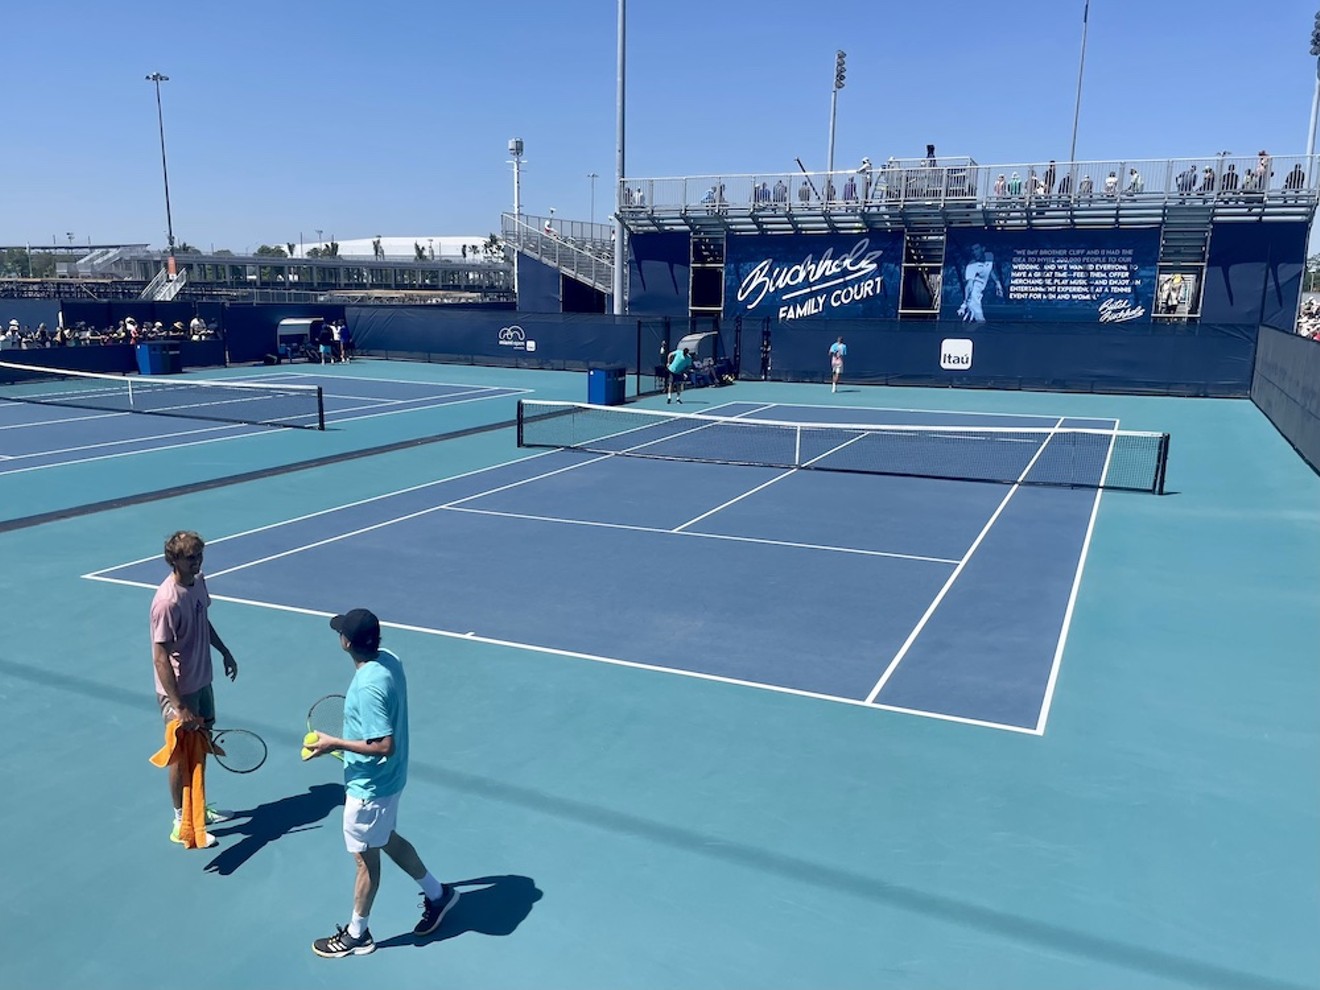 World No. 4 player Alex Zverev warms up on the practice court on Saturday, March 26, 2022.